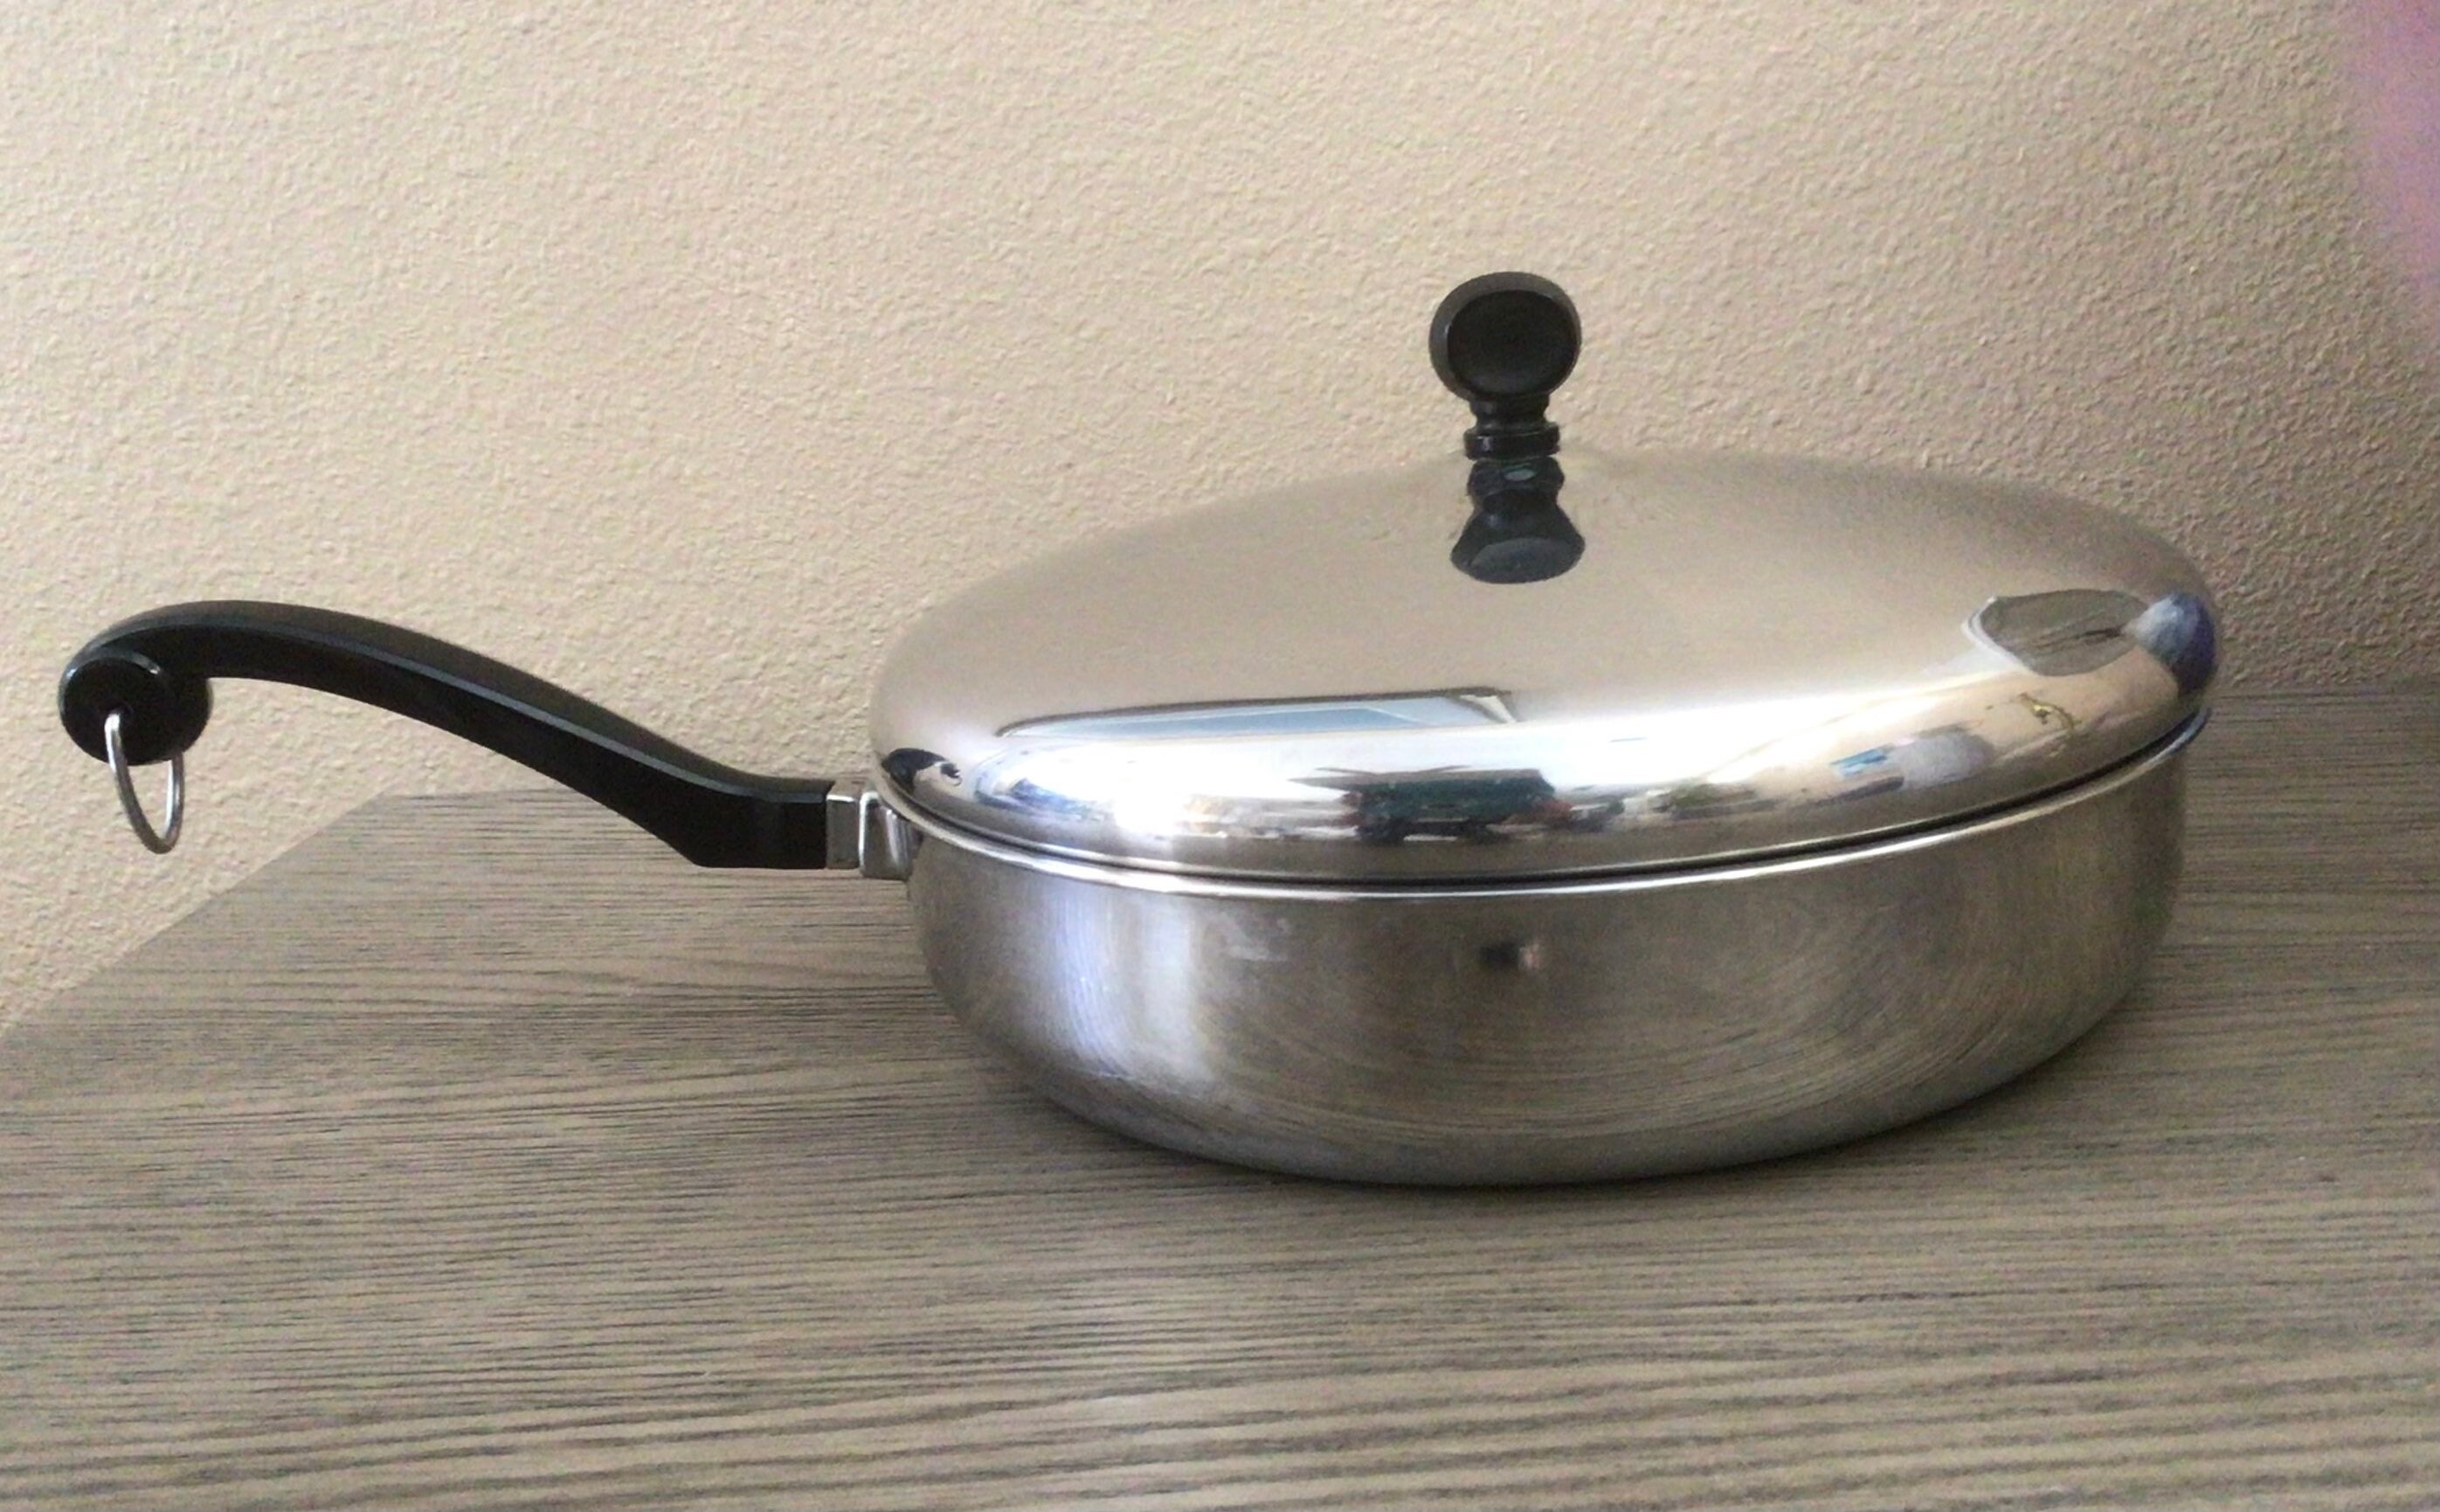 FARBERWARE 310-A VTG ELECTRIC SKILLET 12” HIGH DOME LID PAN STAINLESS STEEL